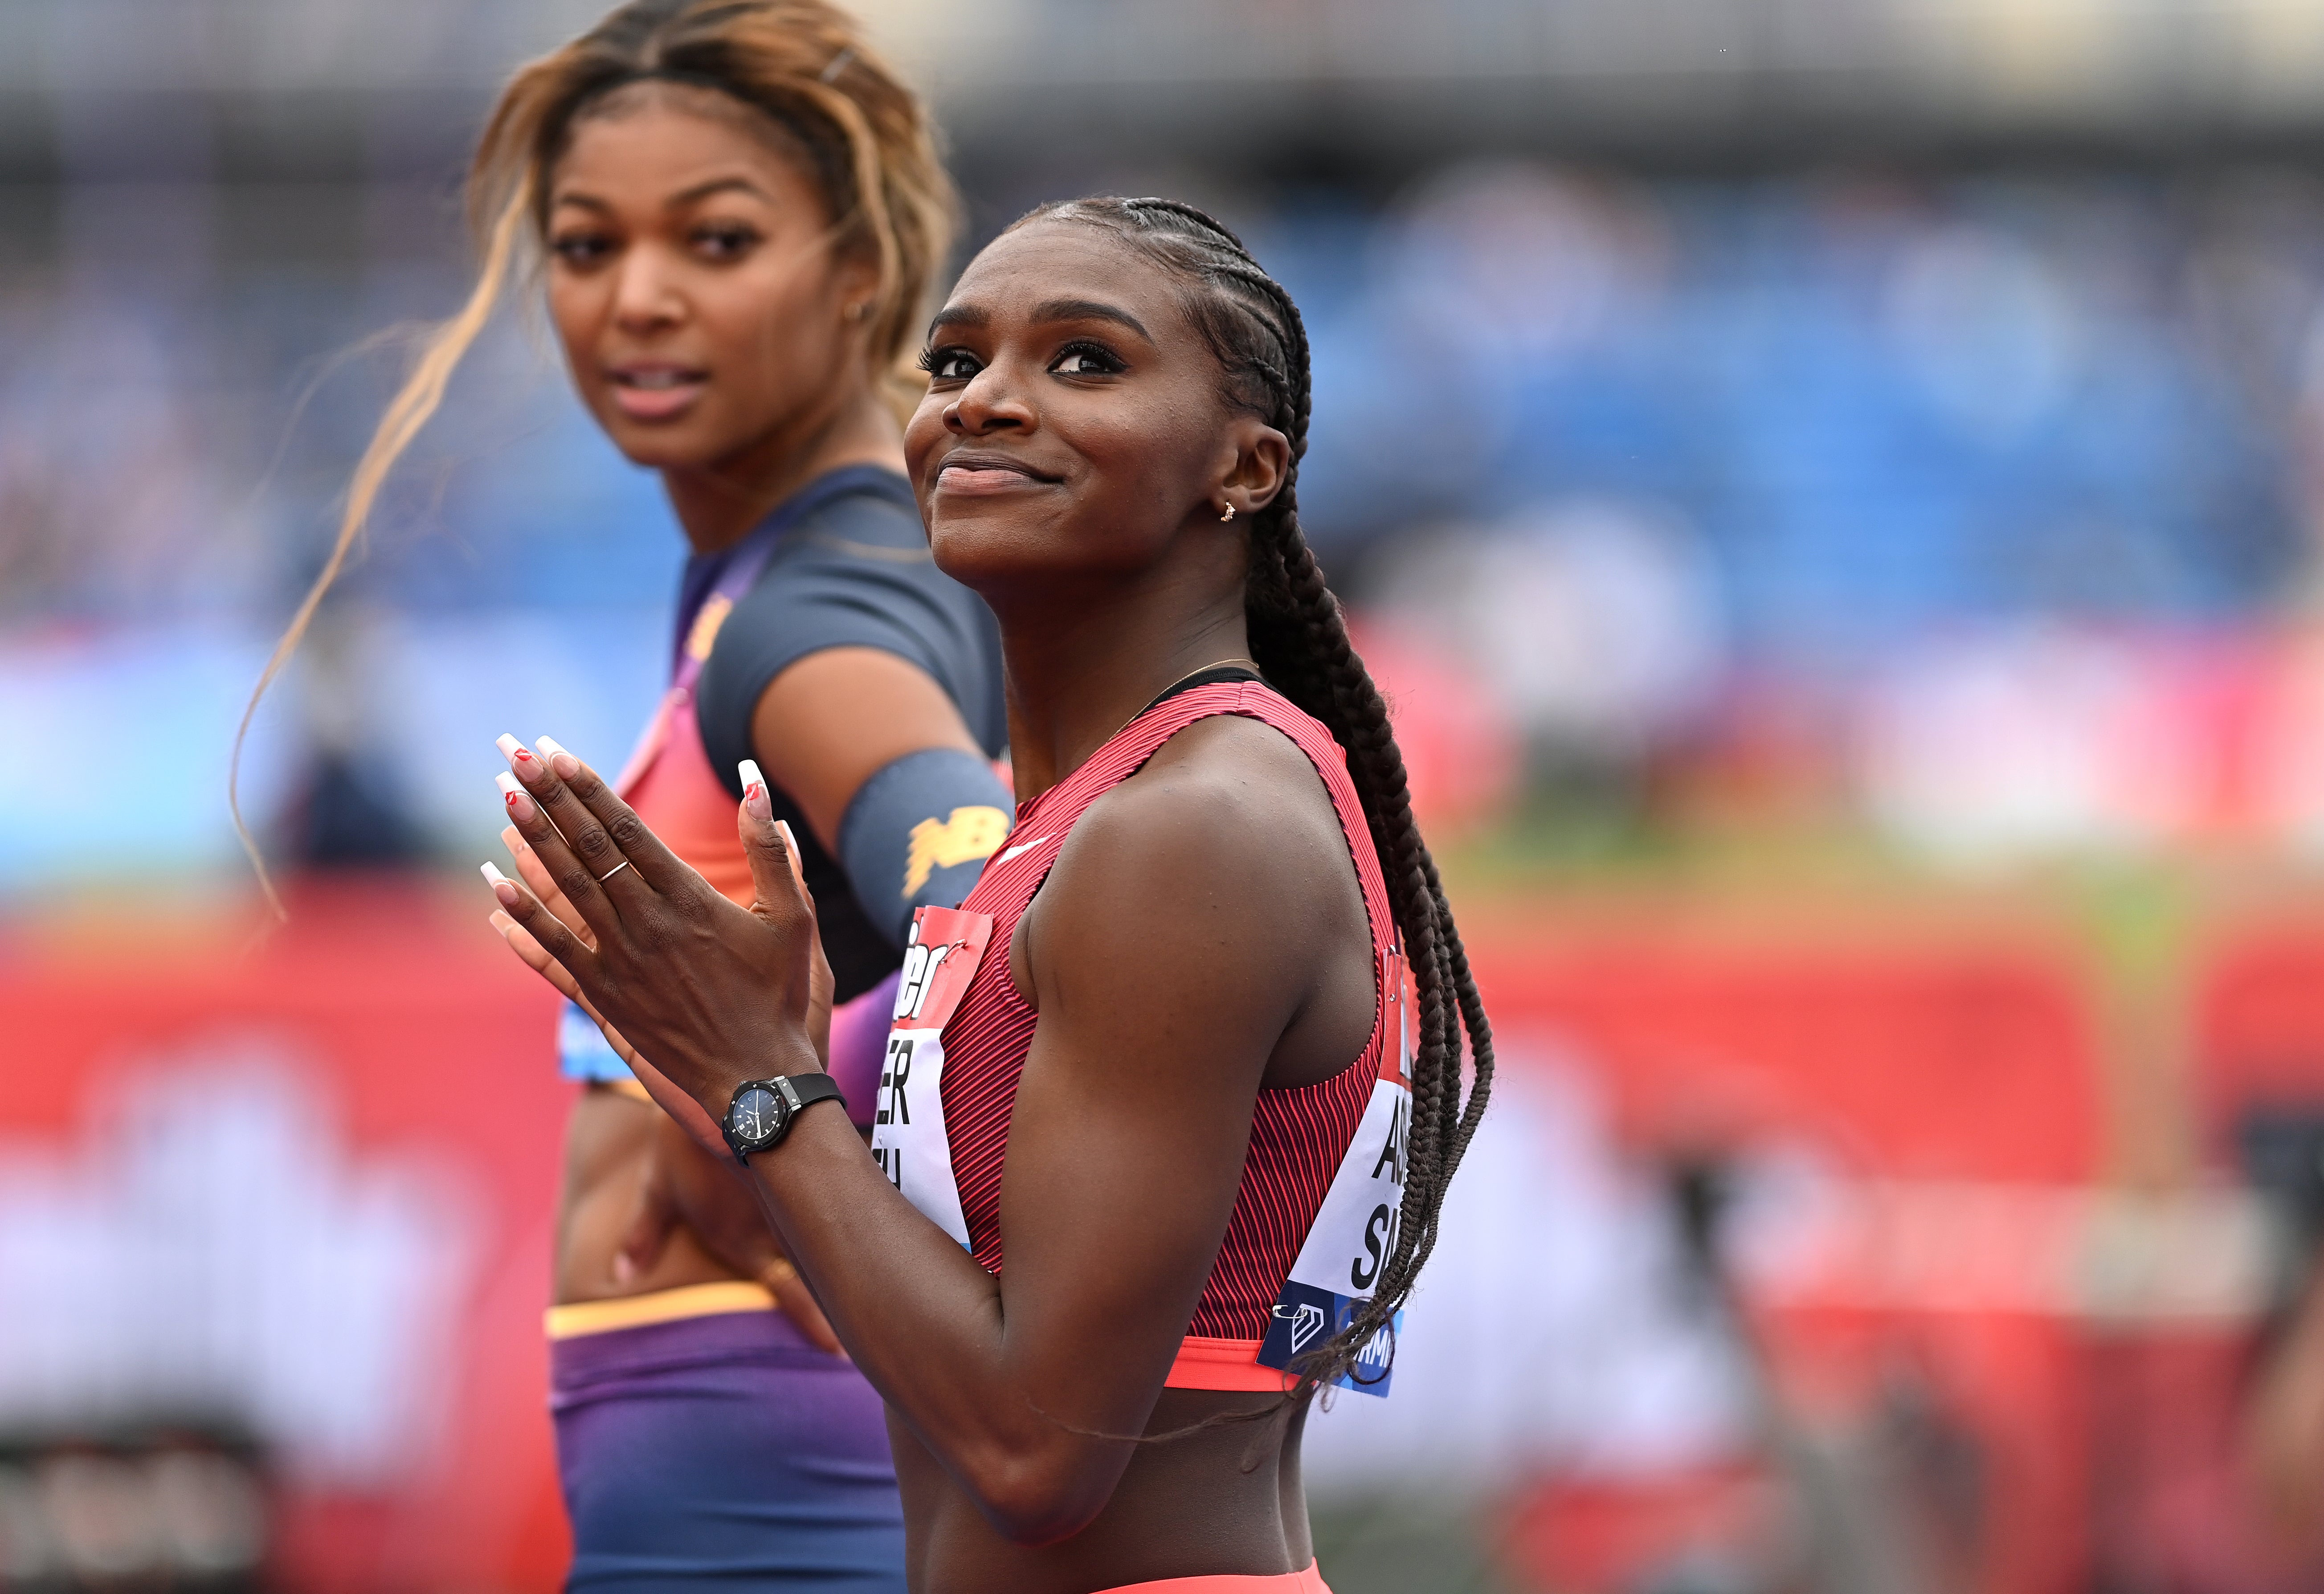 Dina Asher-Smith after winning the Women’s 100m during the Birmingham Diamond League